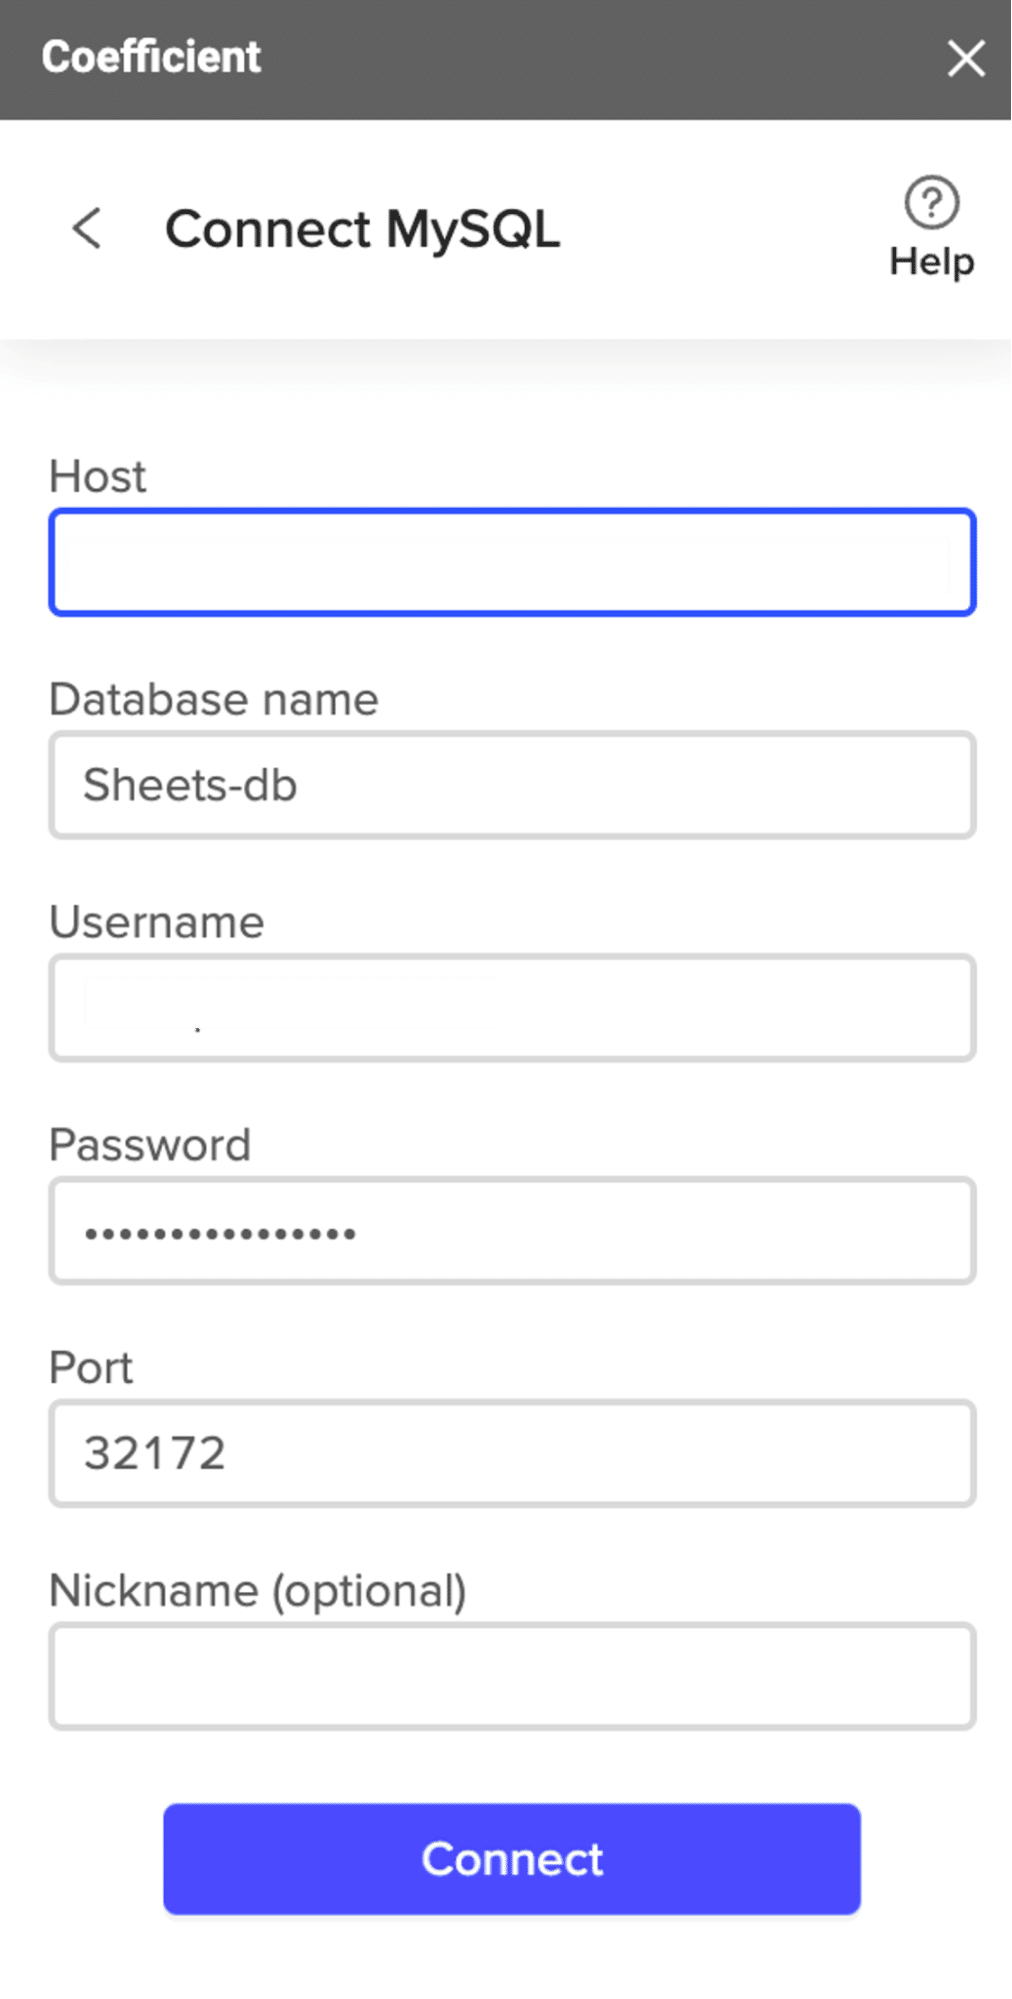 Coefficient shows the Host, Database name, Username, Password, Port, and Nickname fields needed to connect to the MariaDB.